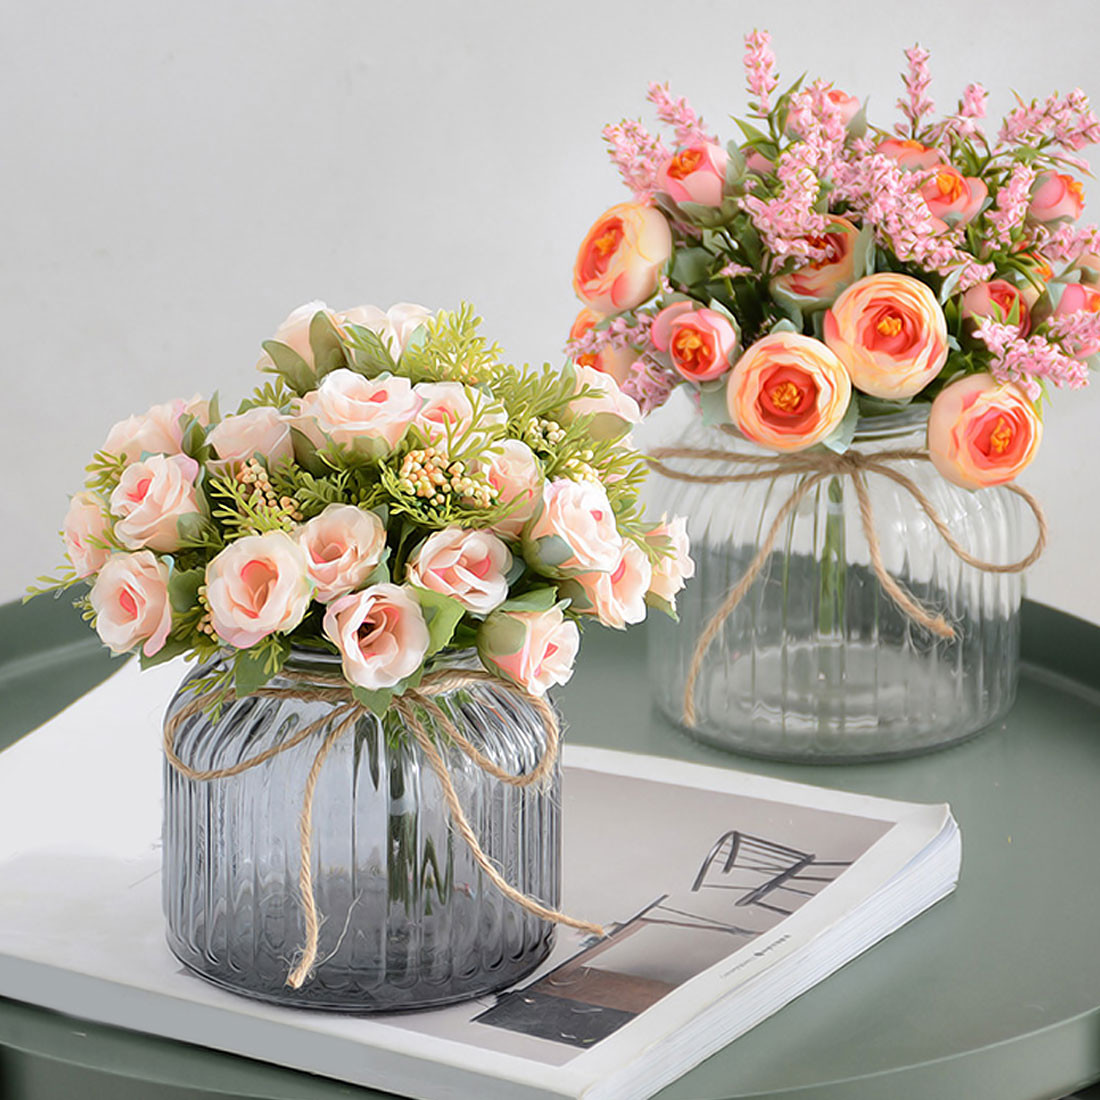 25 attractive Vase and Faux Flowers 2022 free download vase and faux flowers of small bud silk roses simulation flowers artificial flowers 13 heads throughout total width20cm 1cm0 4 inch